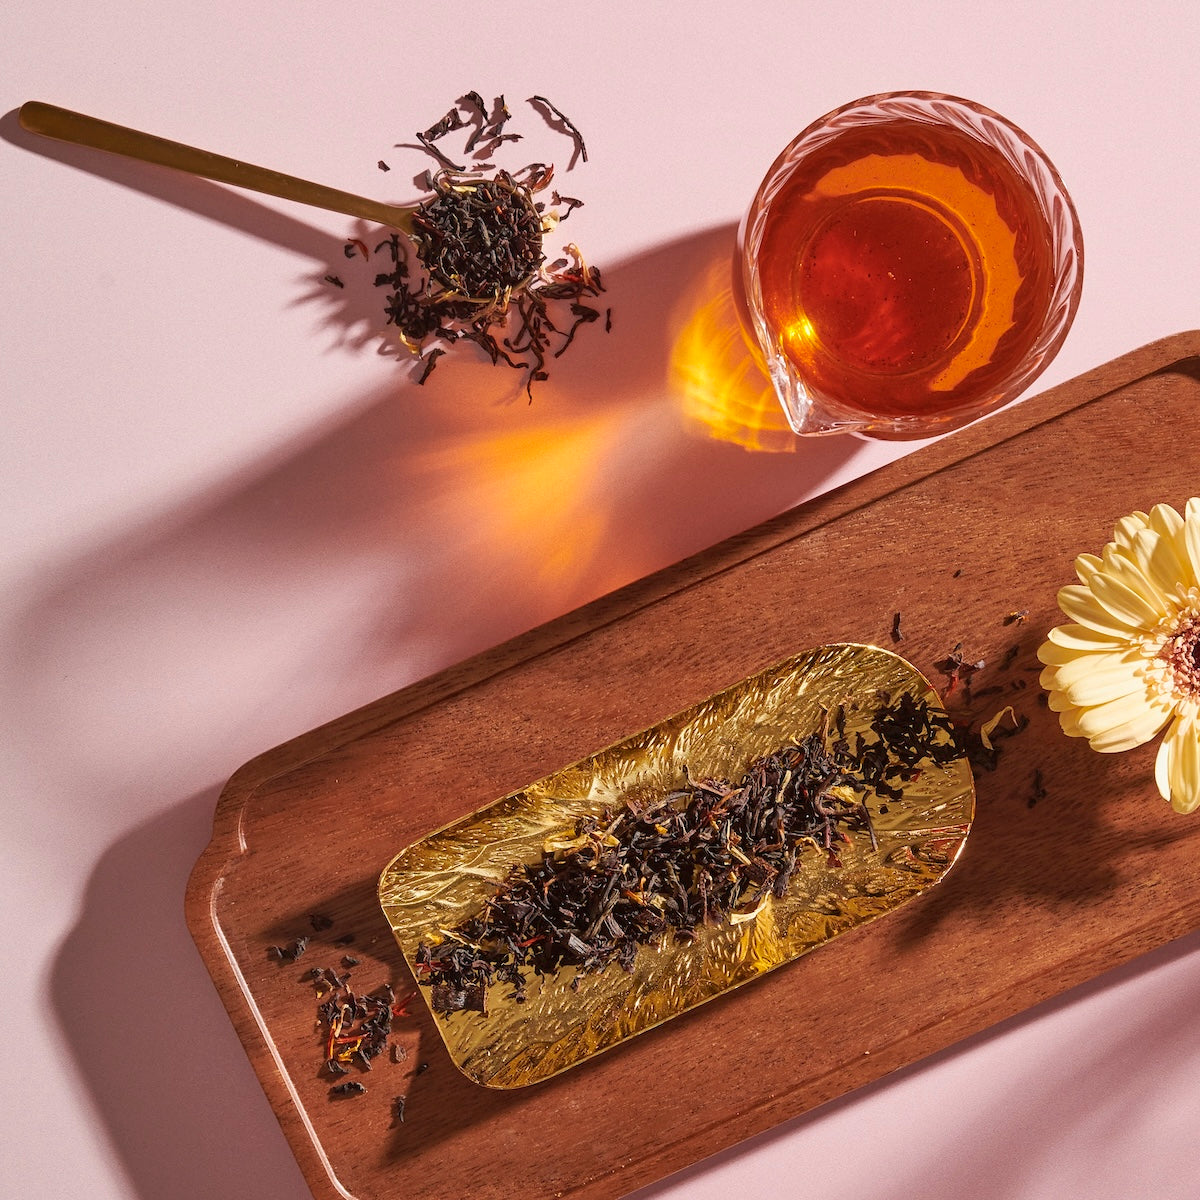 A flat lay image featuring a glass of Magic Hour's Goddess of Earl: Madagascar Vanilla Creme Tea for Soothing Delight & Delicious Decadence, a spoon with loose tea leaves, and a golden tray with more tea leaves resting on a wooden tray. A single yellow flower decorates the corner of the wooden tray, all set against a light pink background.